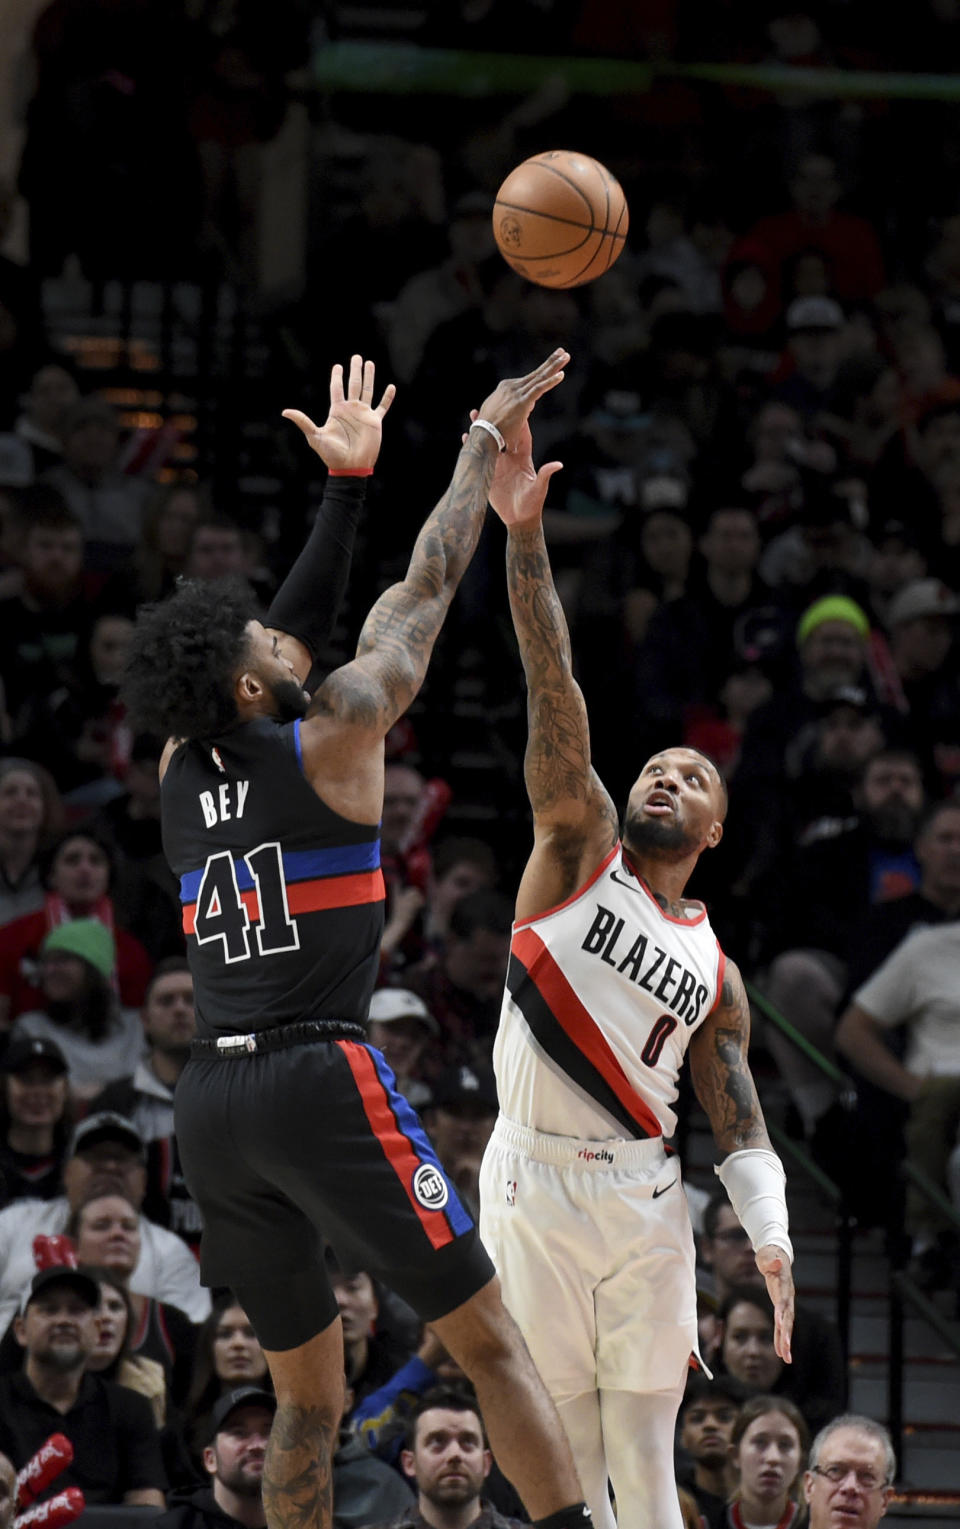 Portland Trail Blazers guard Damian Lillard, right, goes up block a shot by Detroit Pistons forward Saddiq Bey, left, during the first half of an NBA basketball game in Portland, Ore., Monday, Jan. 2, 2023. (AP Photo/Steve Dykes)